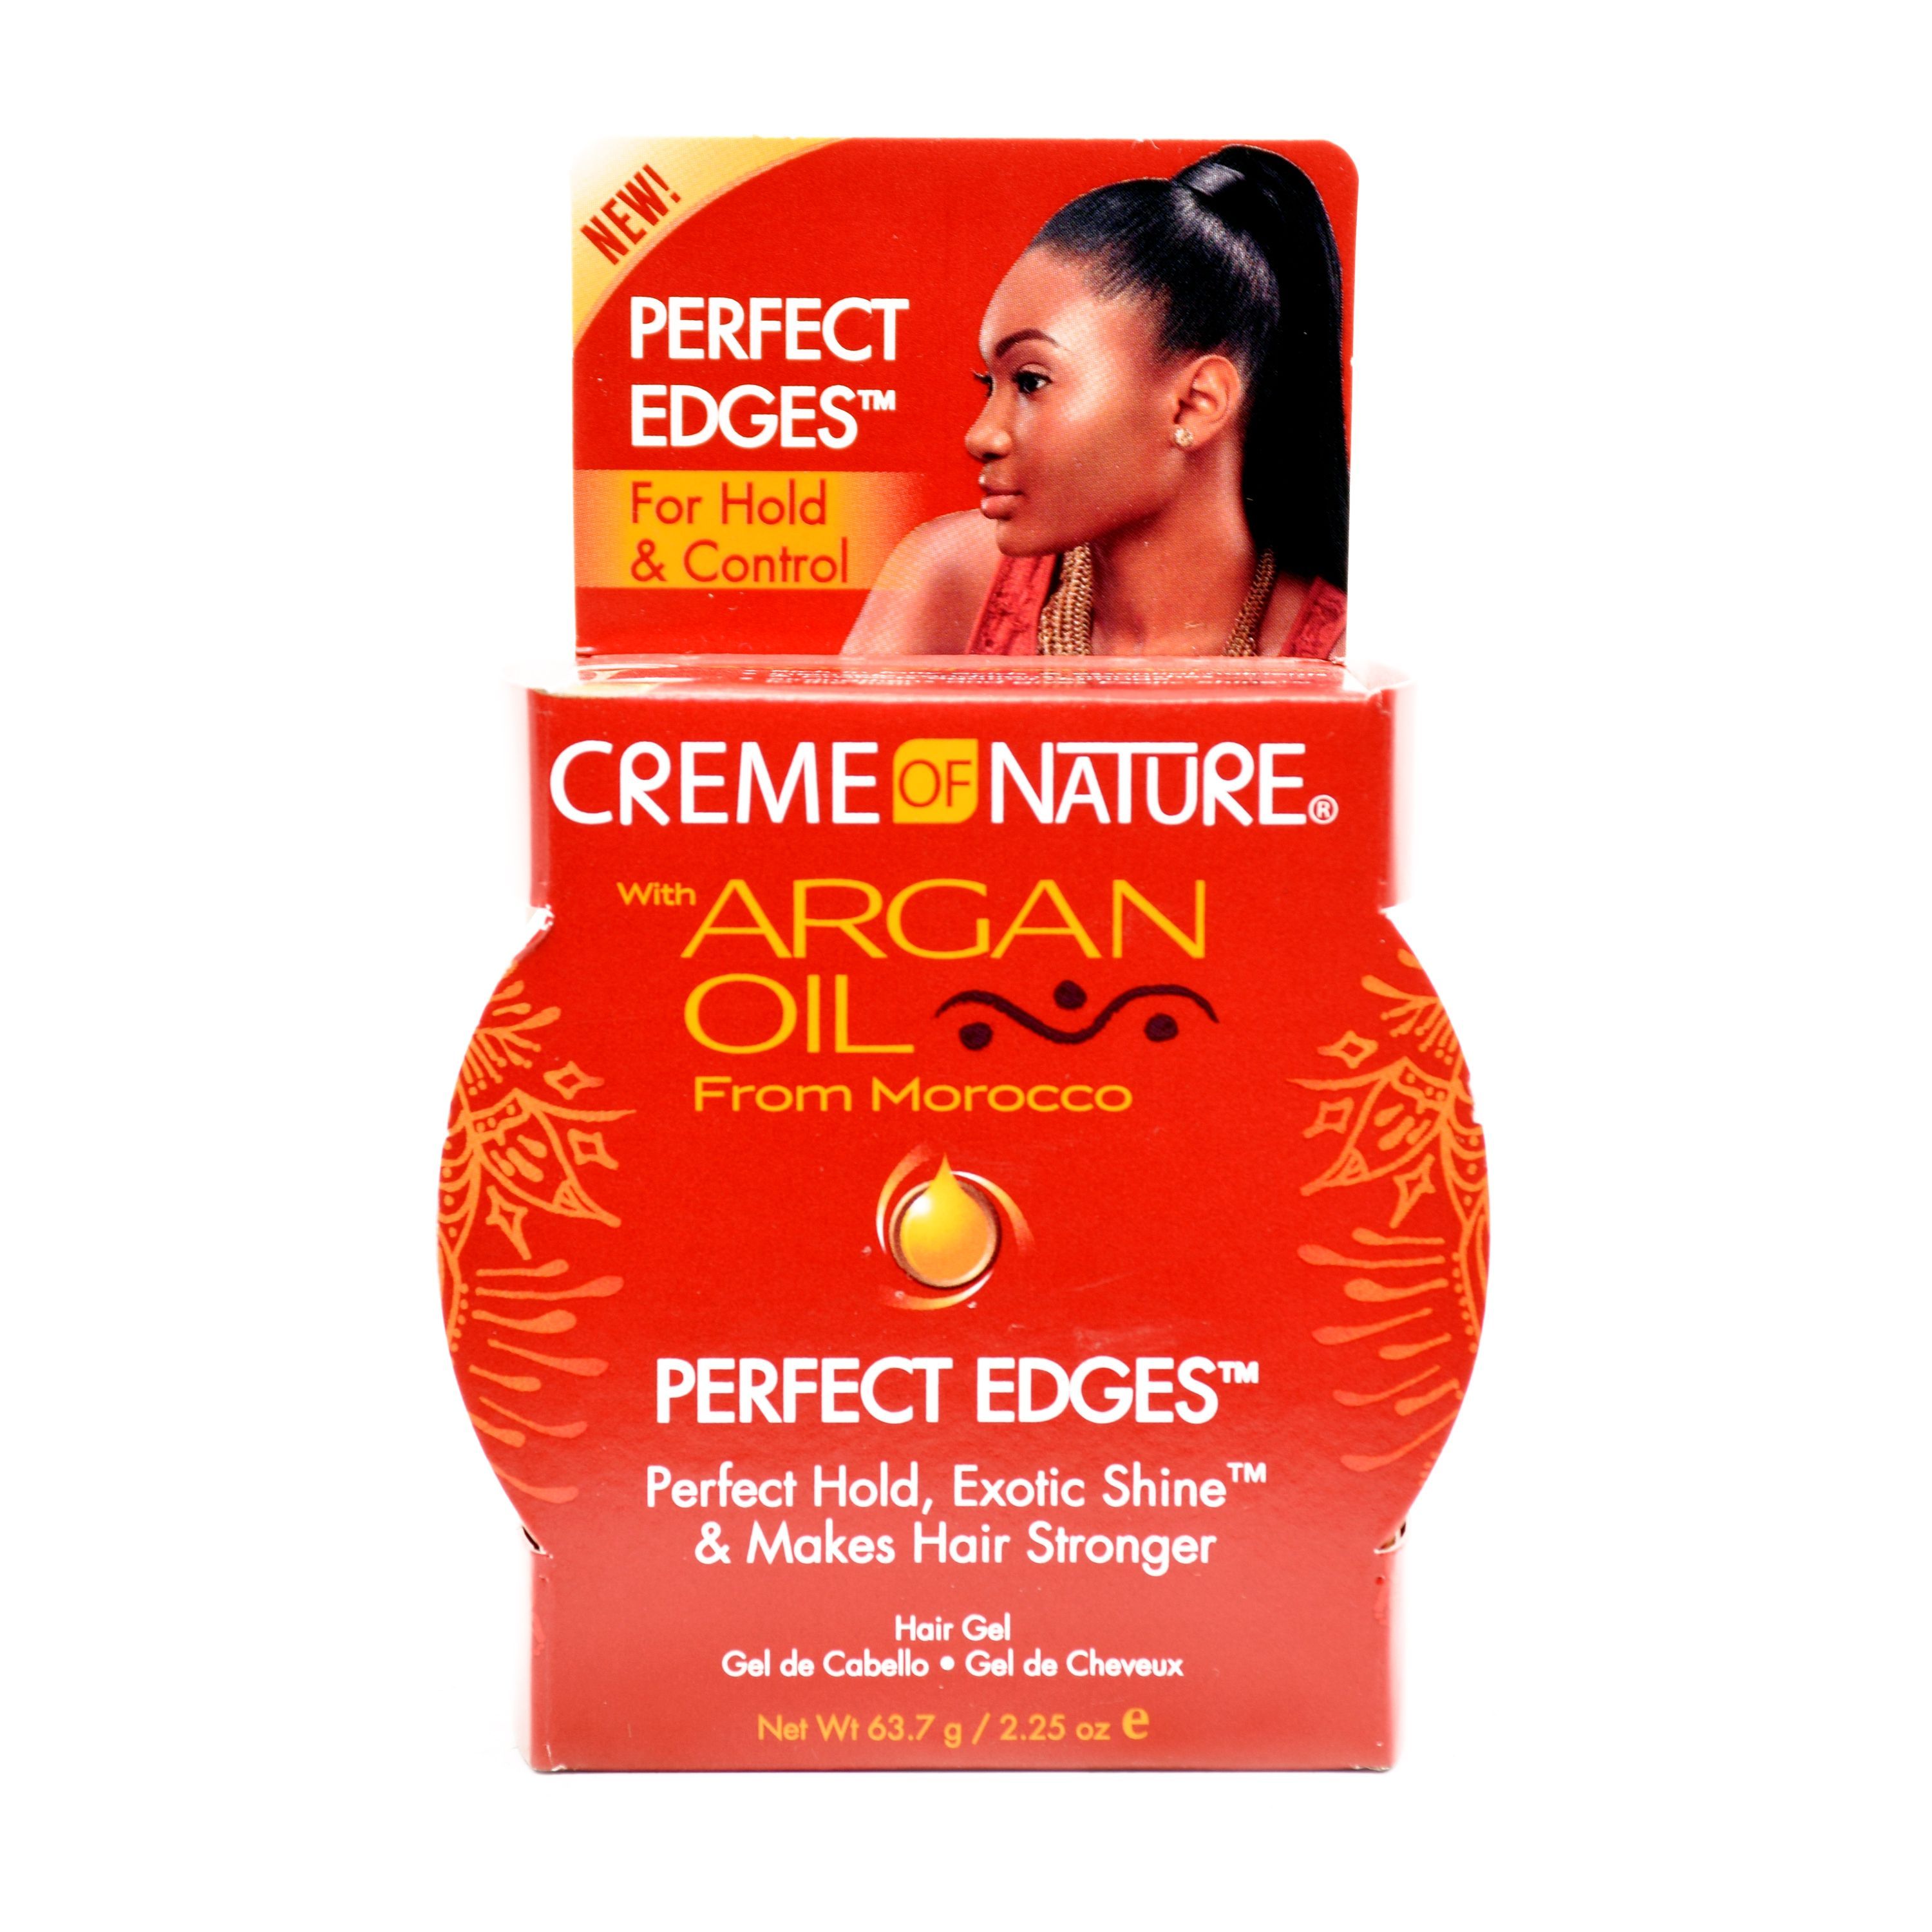 Creme Of Nature Argan Oil Perfect Edges For Hold & Control - 2.25oz